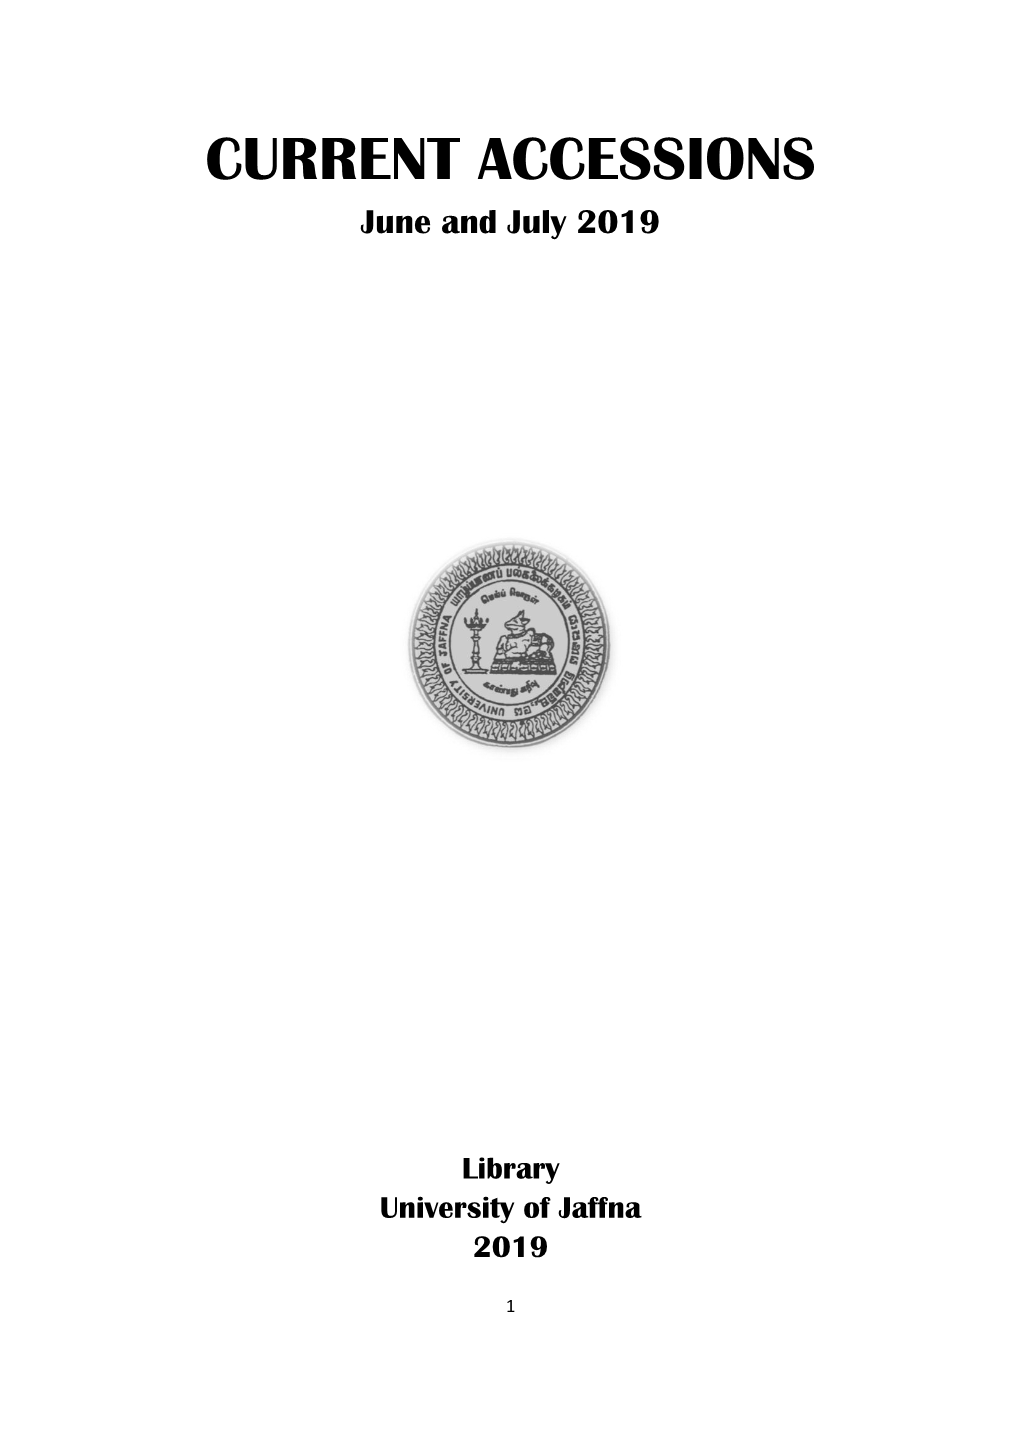 CURRENT ACCESSIONS June and July 2019